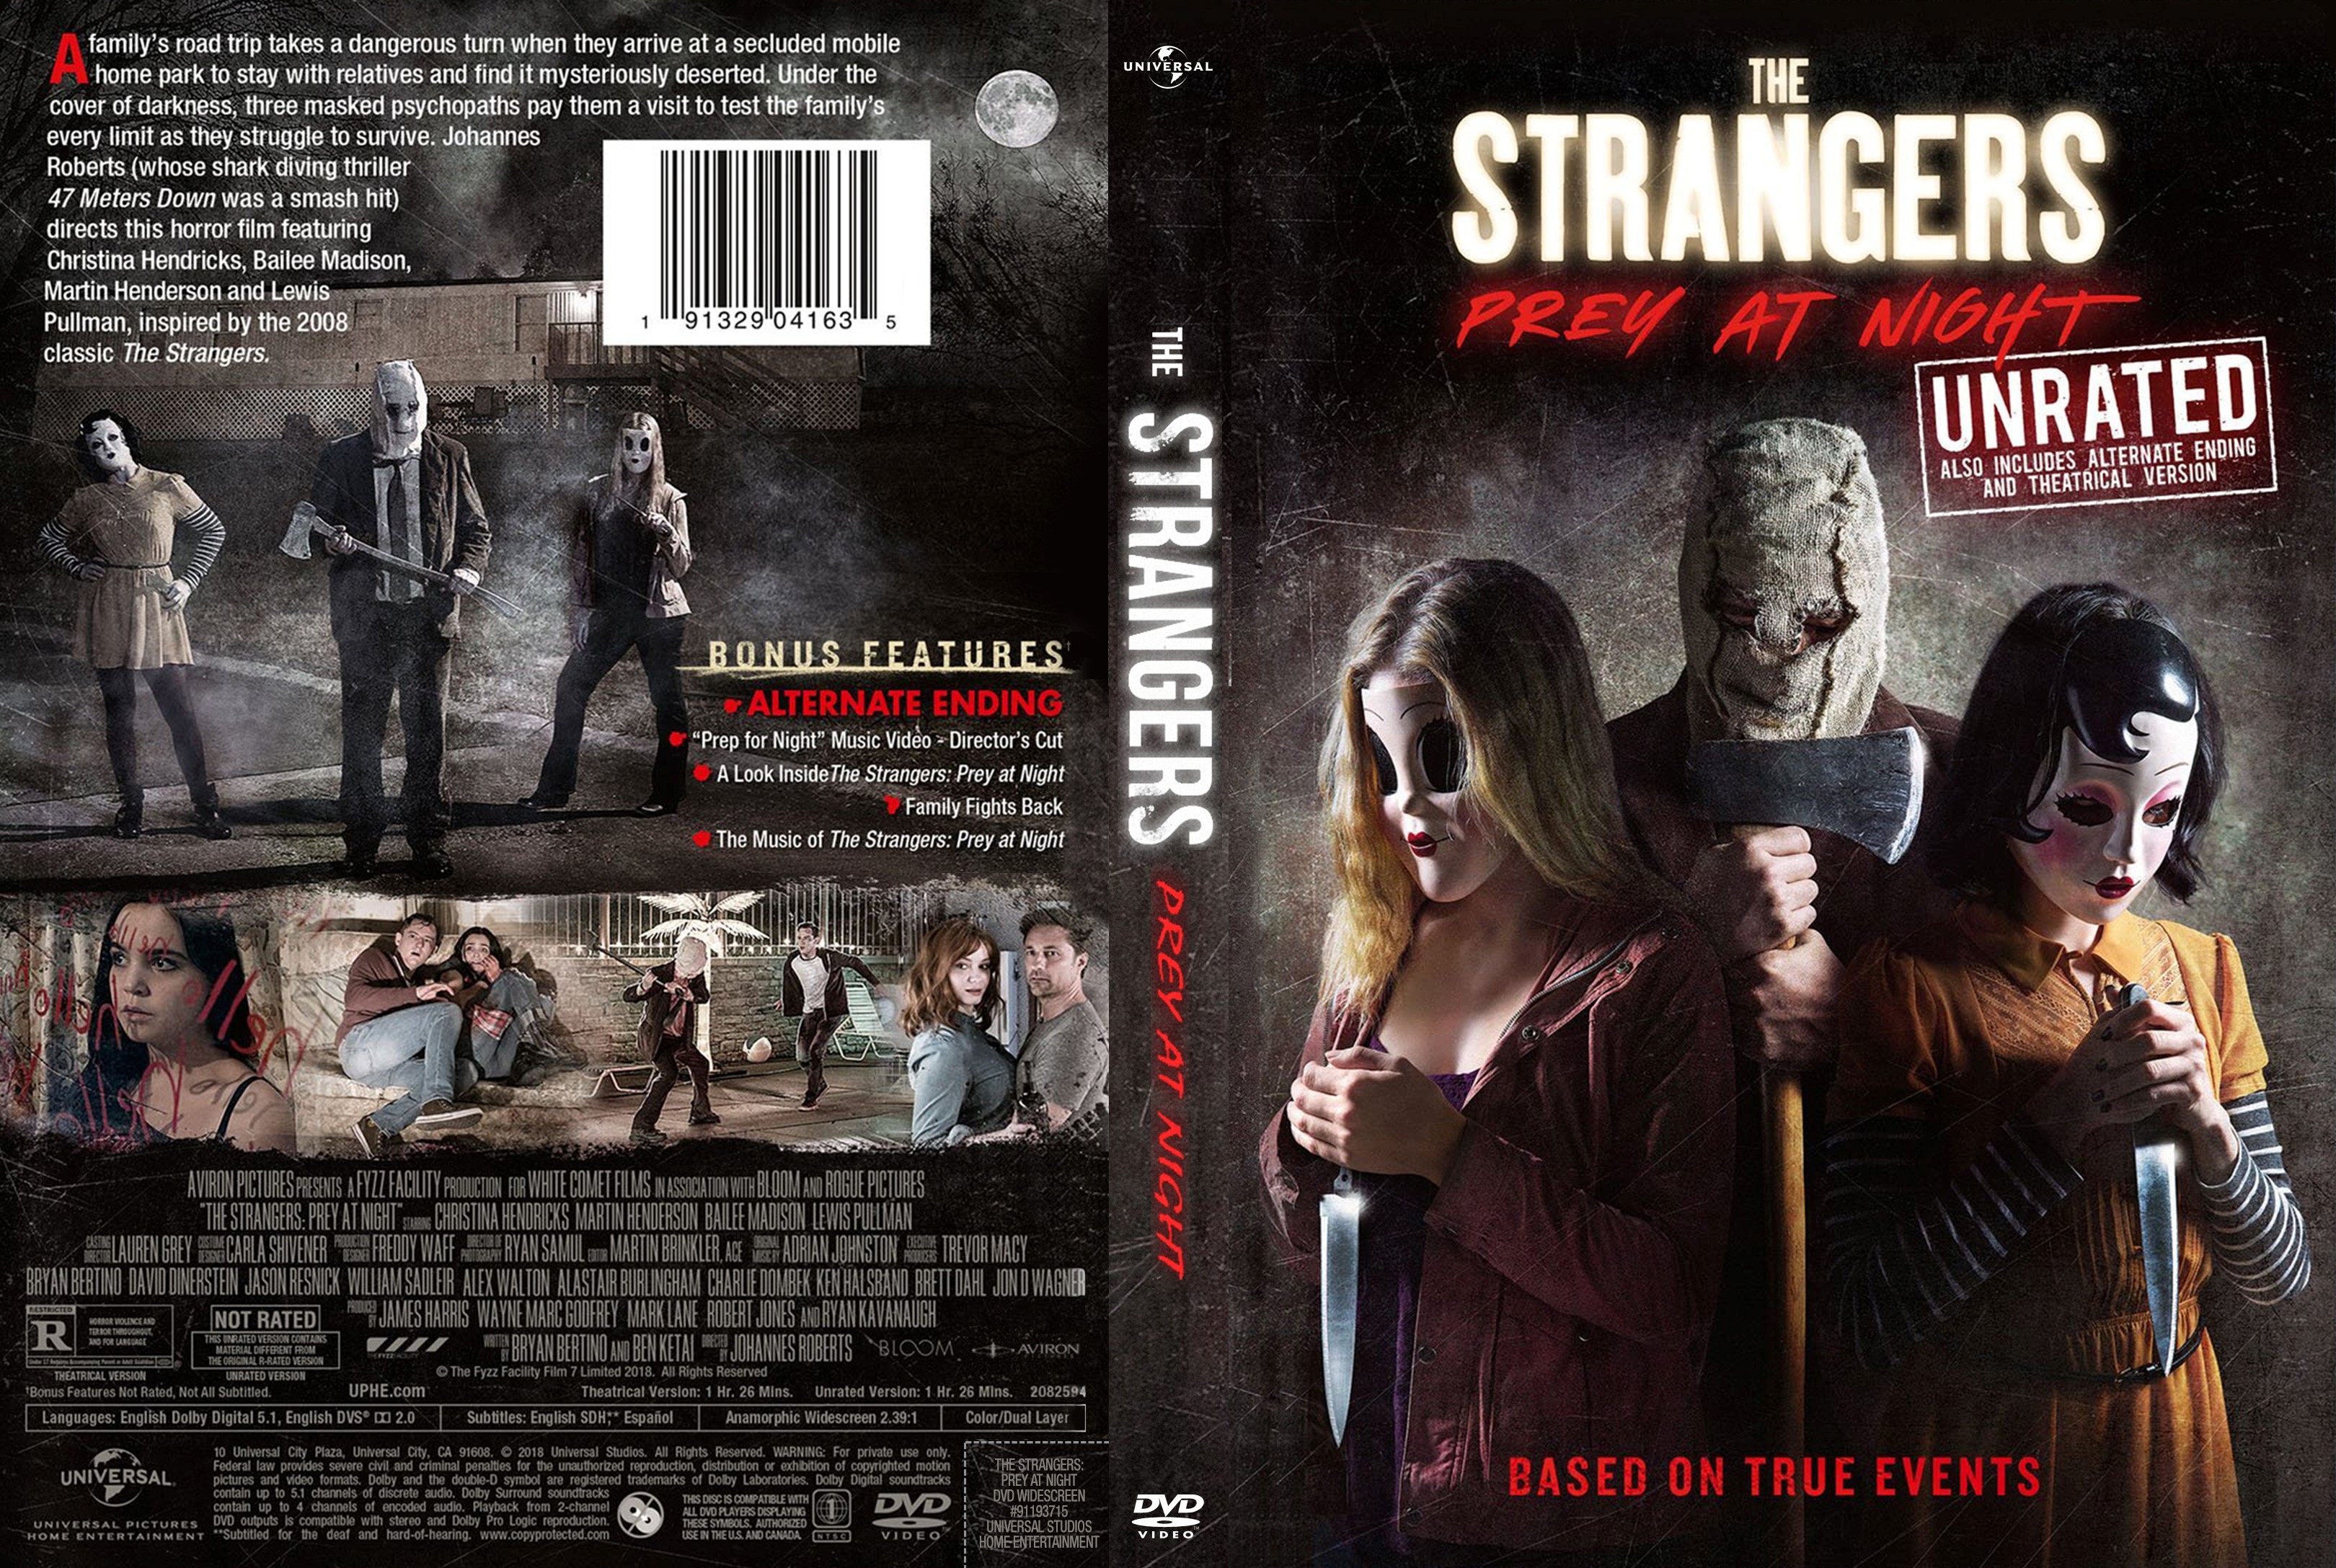 The Strangers: Prey at Night (scan) DVD Cover 